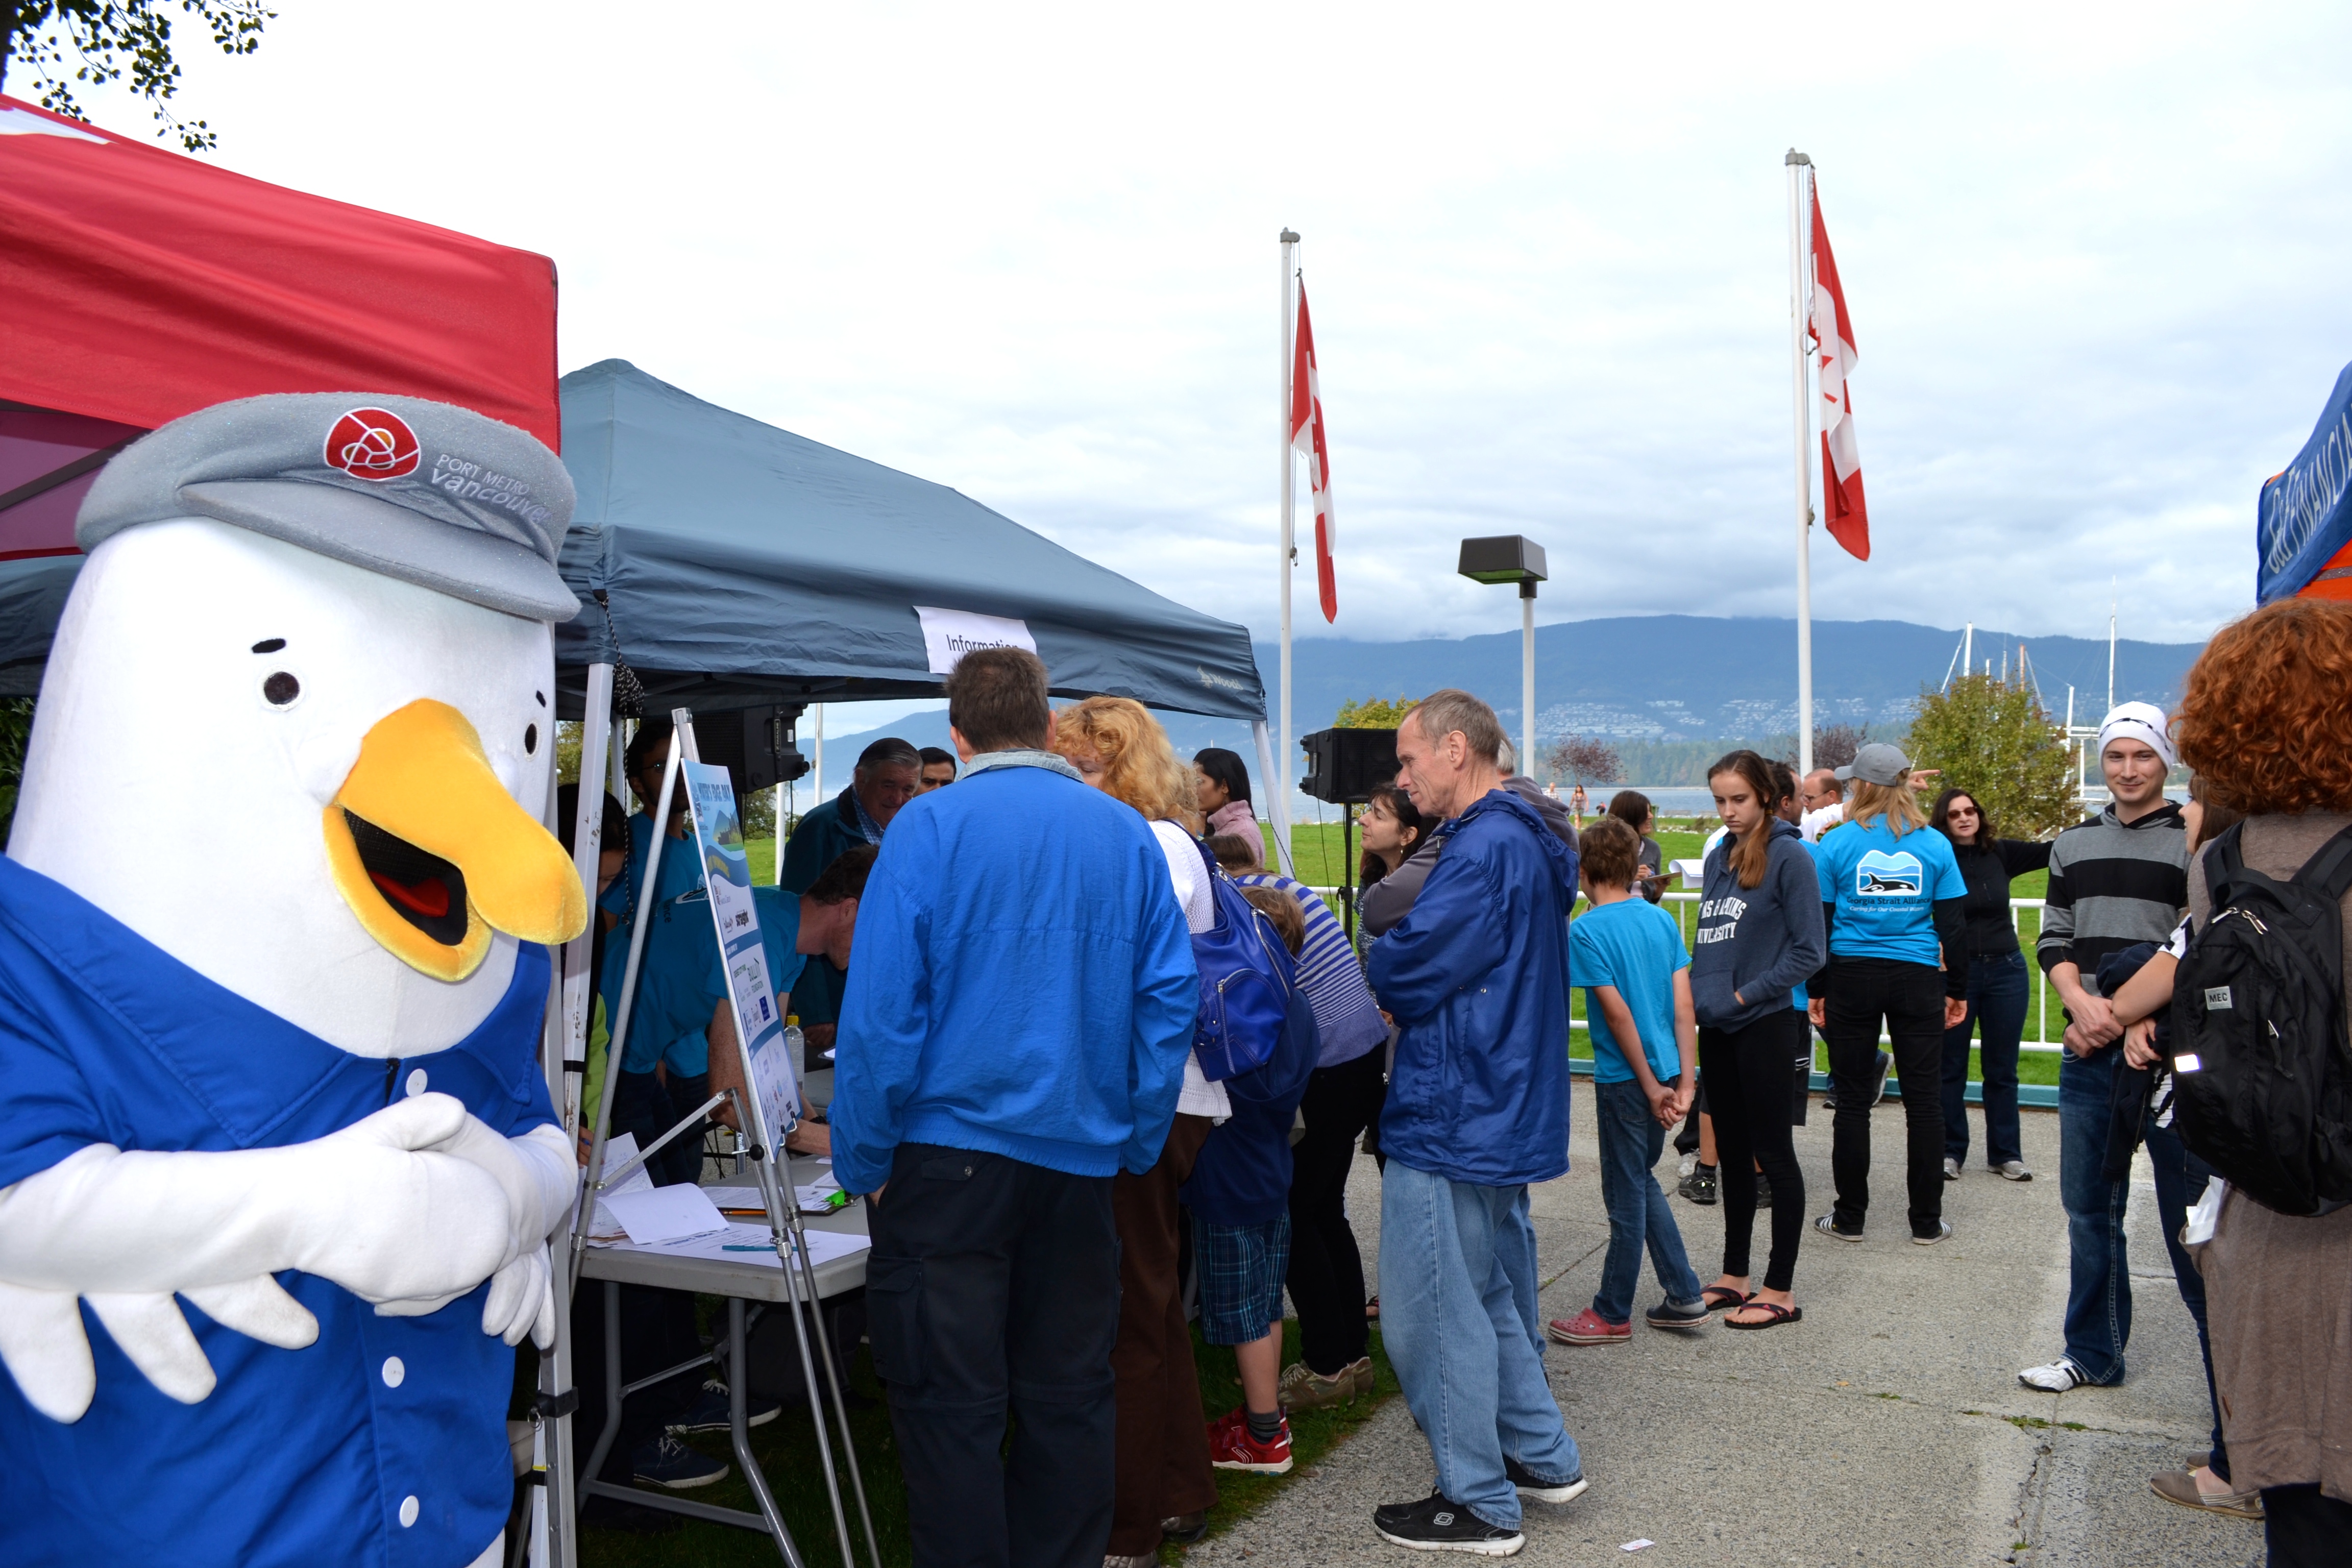 Port of Vancouver's Salty the Seagull mascot greets participants at Water's Edge Day 